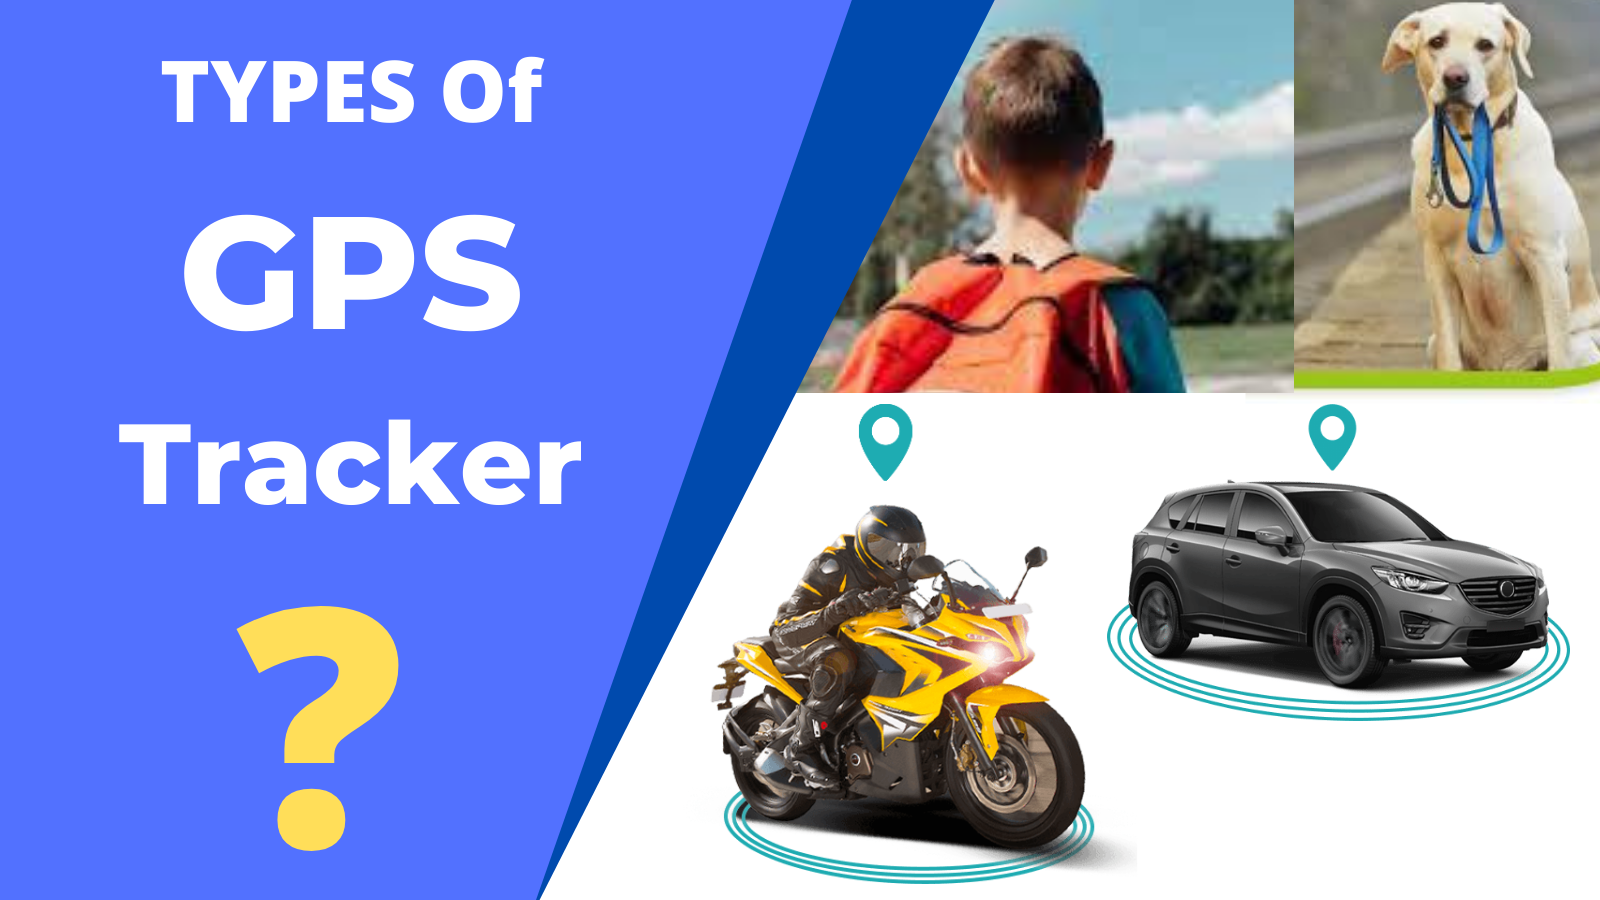 TYPES OF GPS